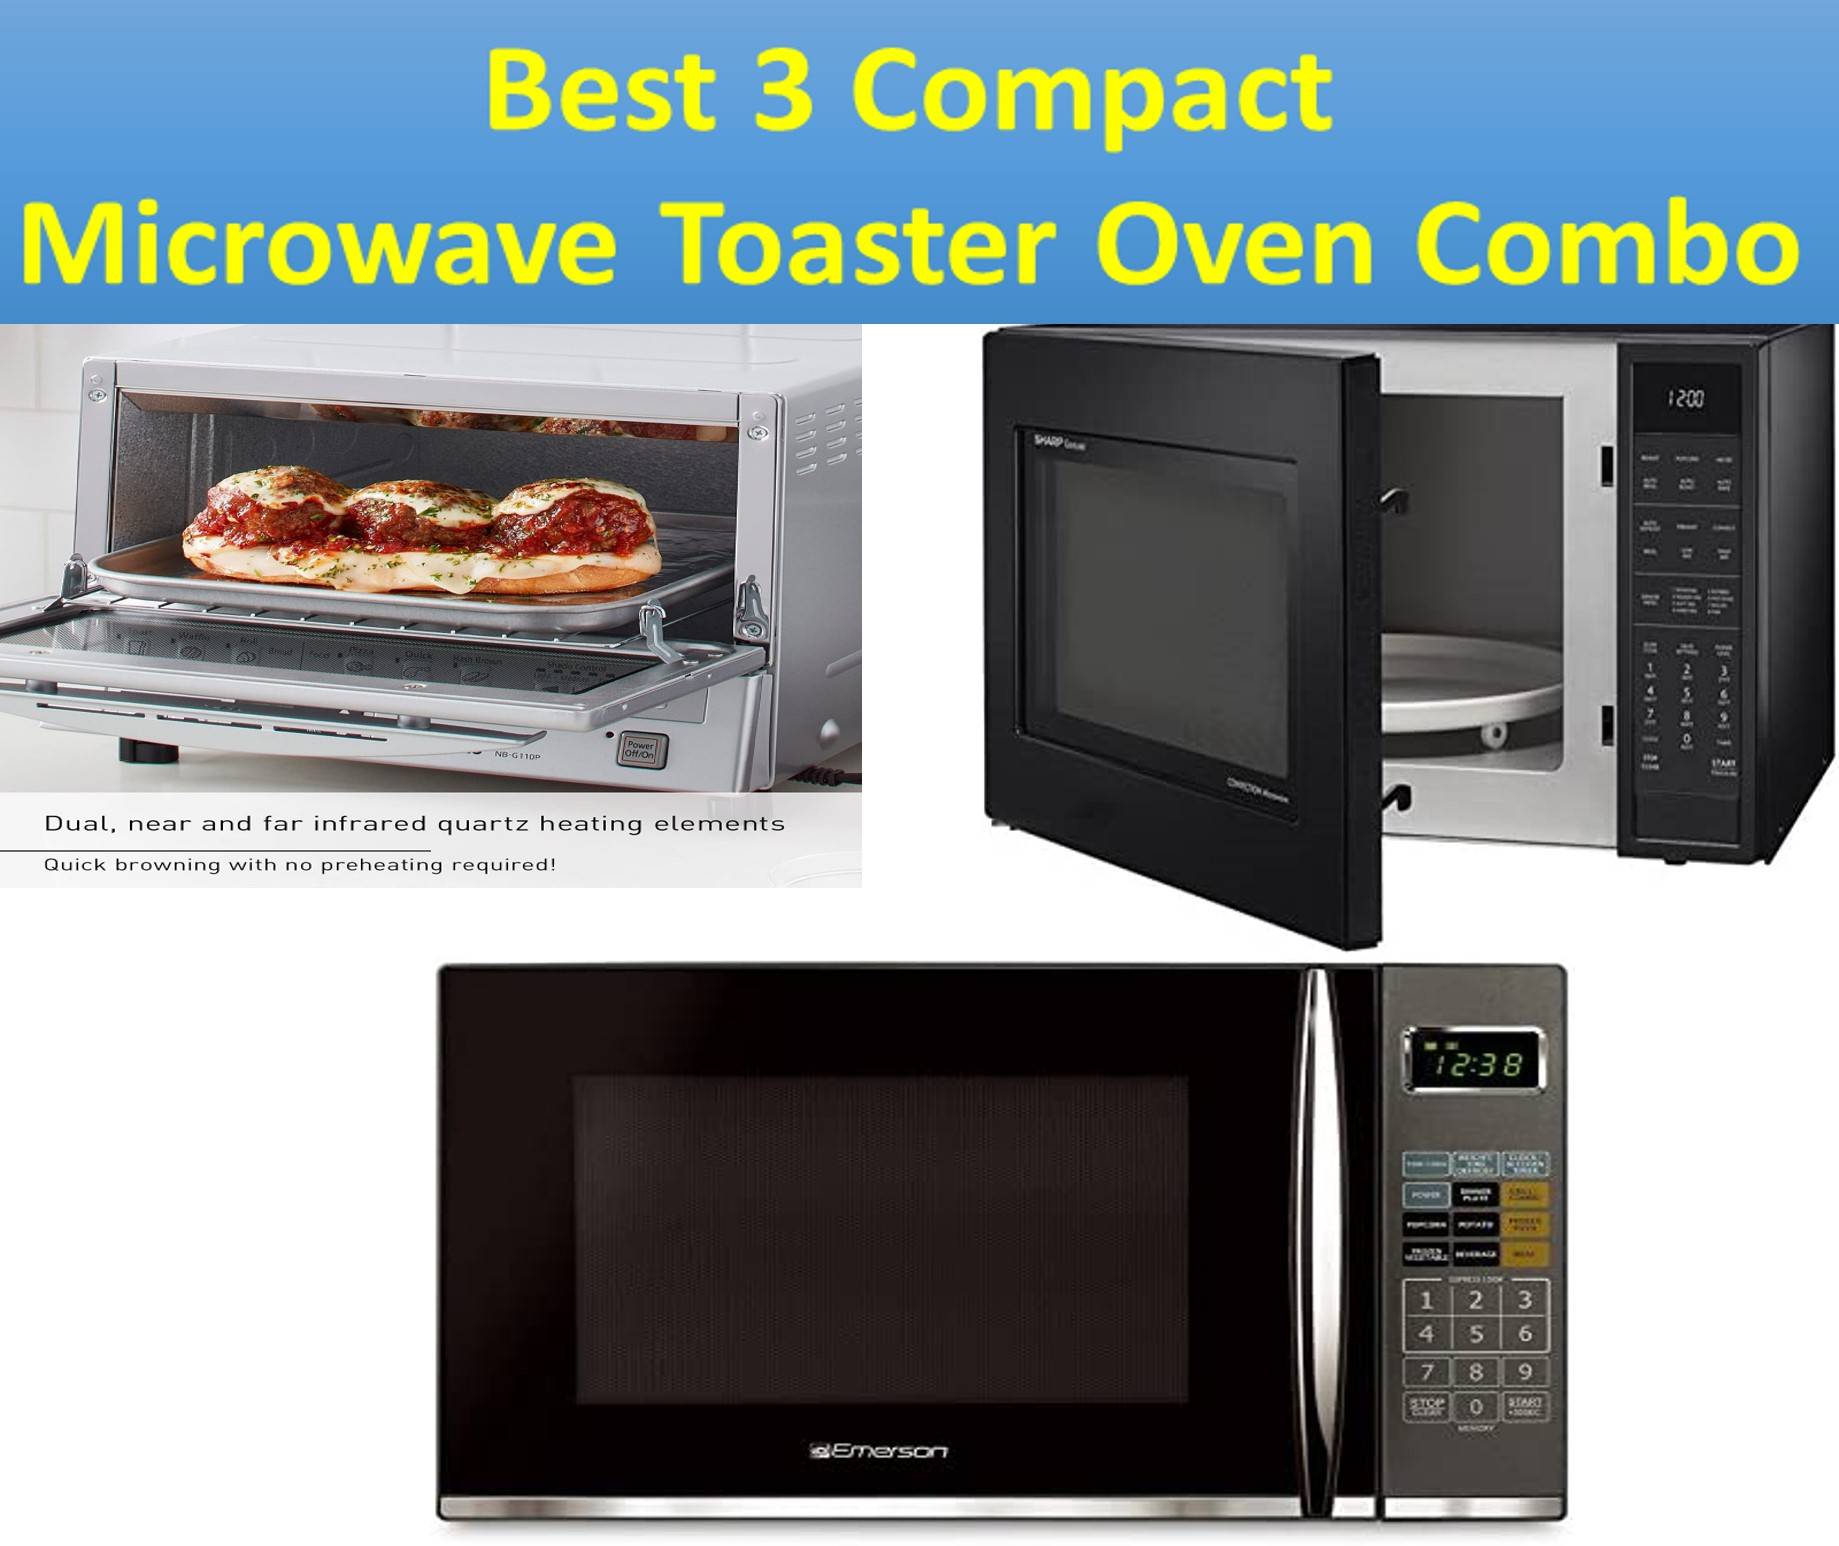 best 3 compact microwave toaster oven combo